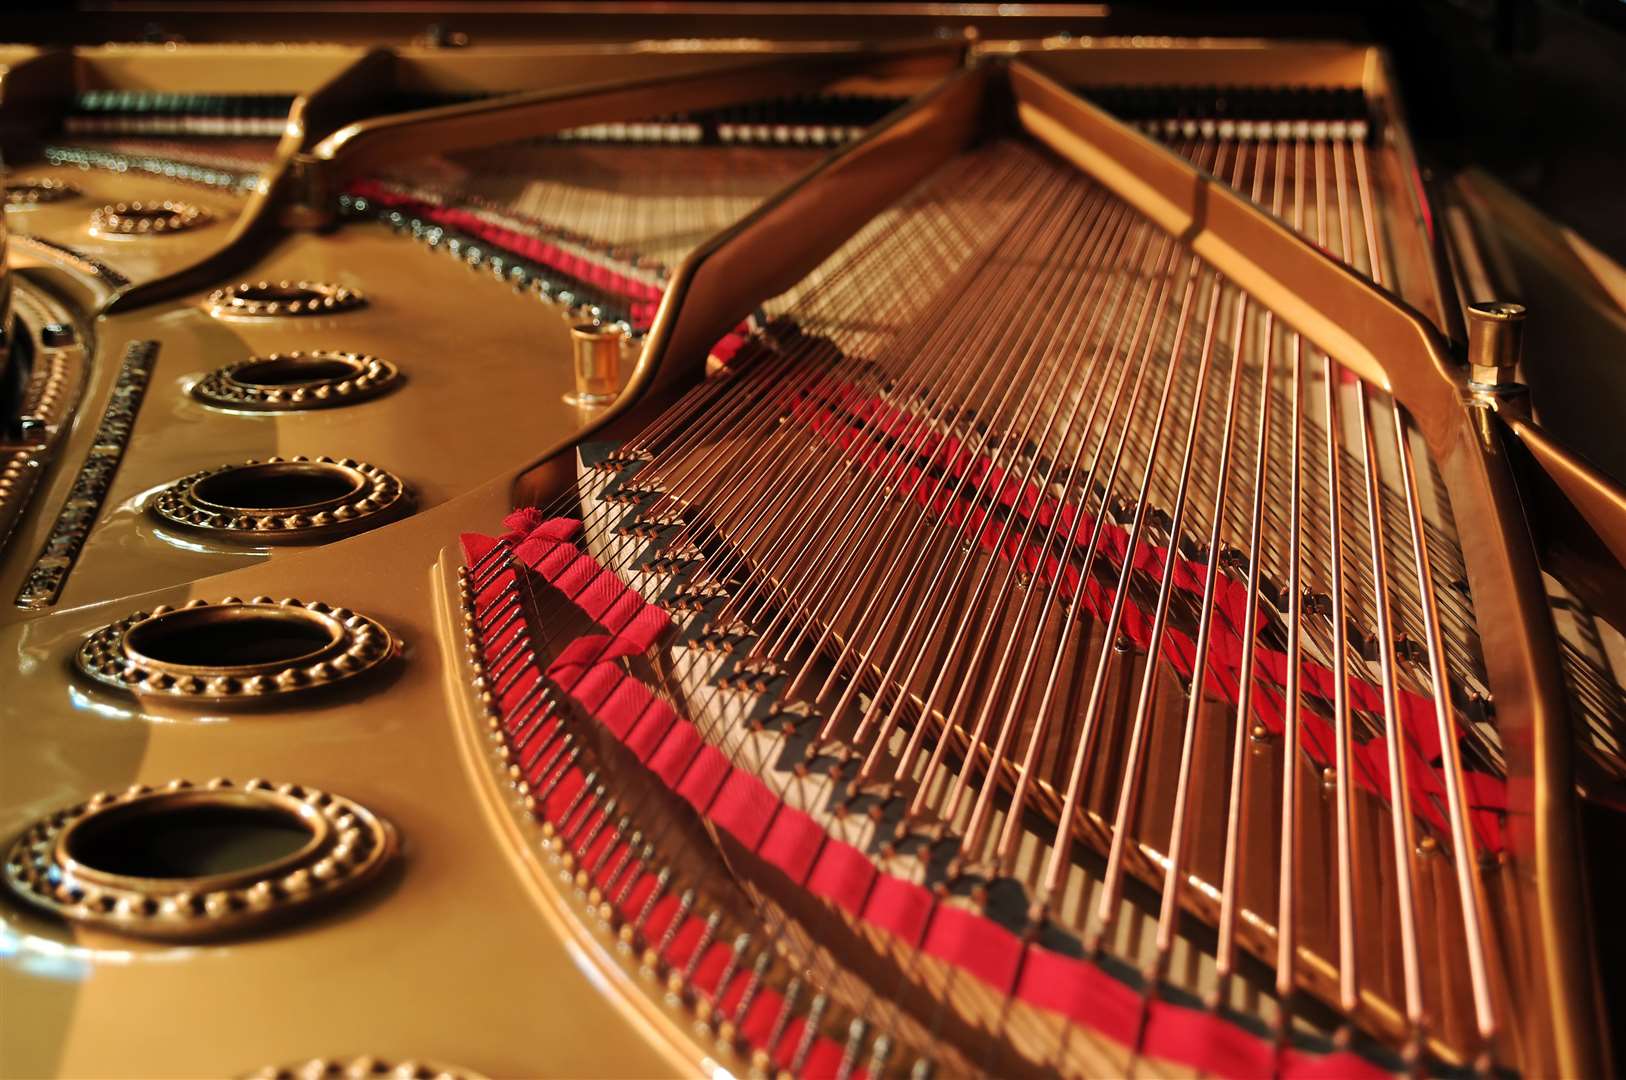 Getting to know the inner workings of the instrument can help you understand the sound better.